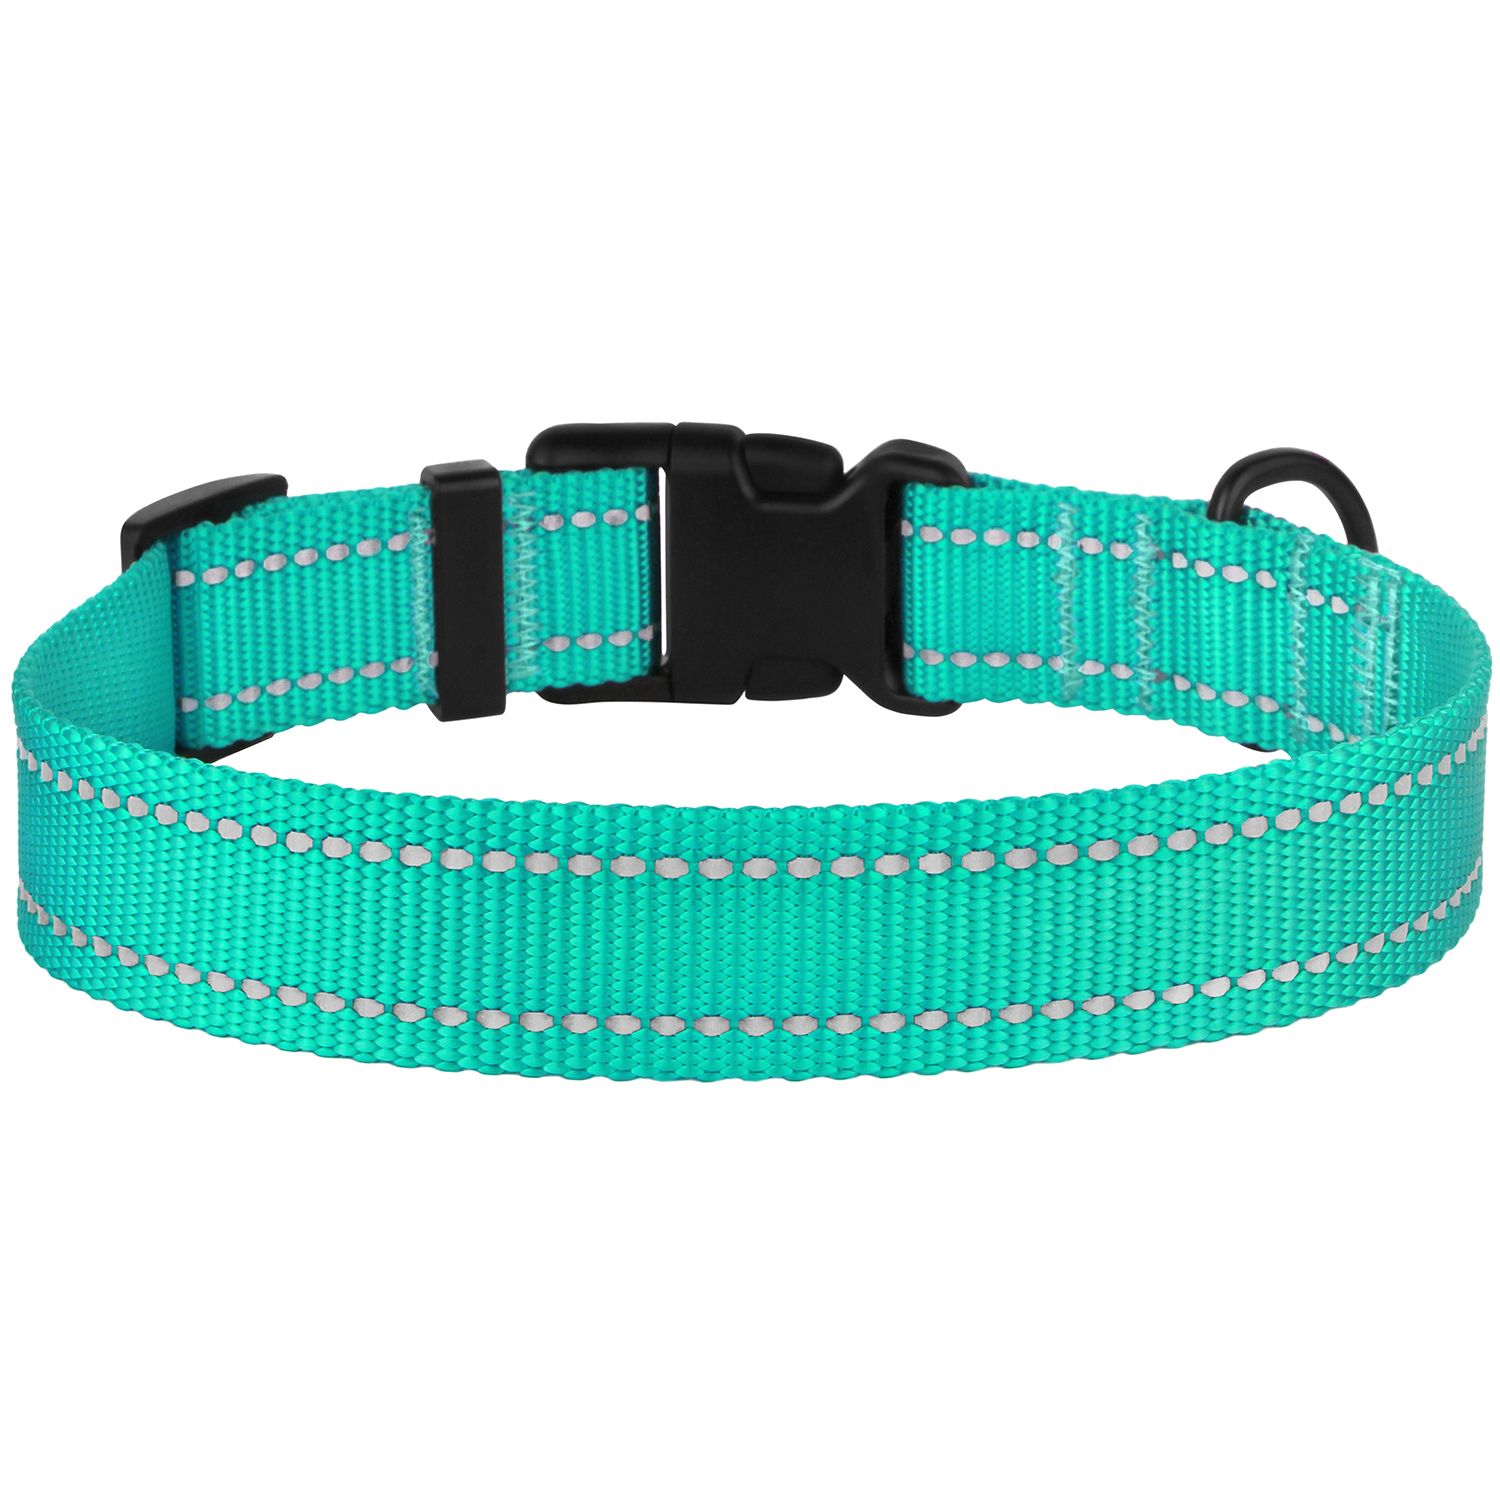 CollarDirect Reflective Dog Collar Safety Nylon Collars for Medium Dogs with Buckle, Mint Green - image 3 of 7